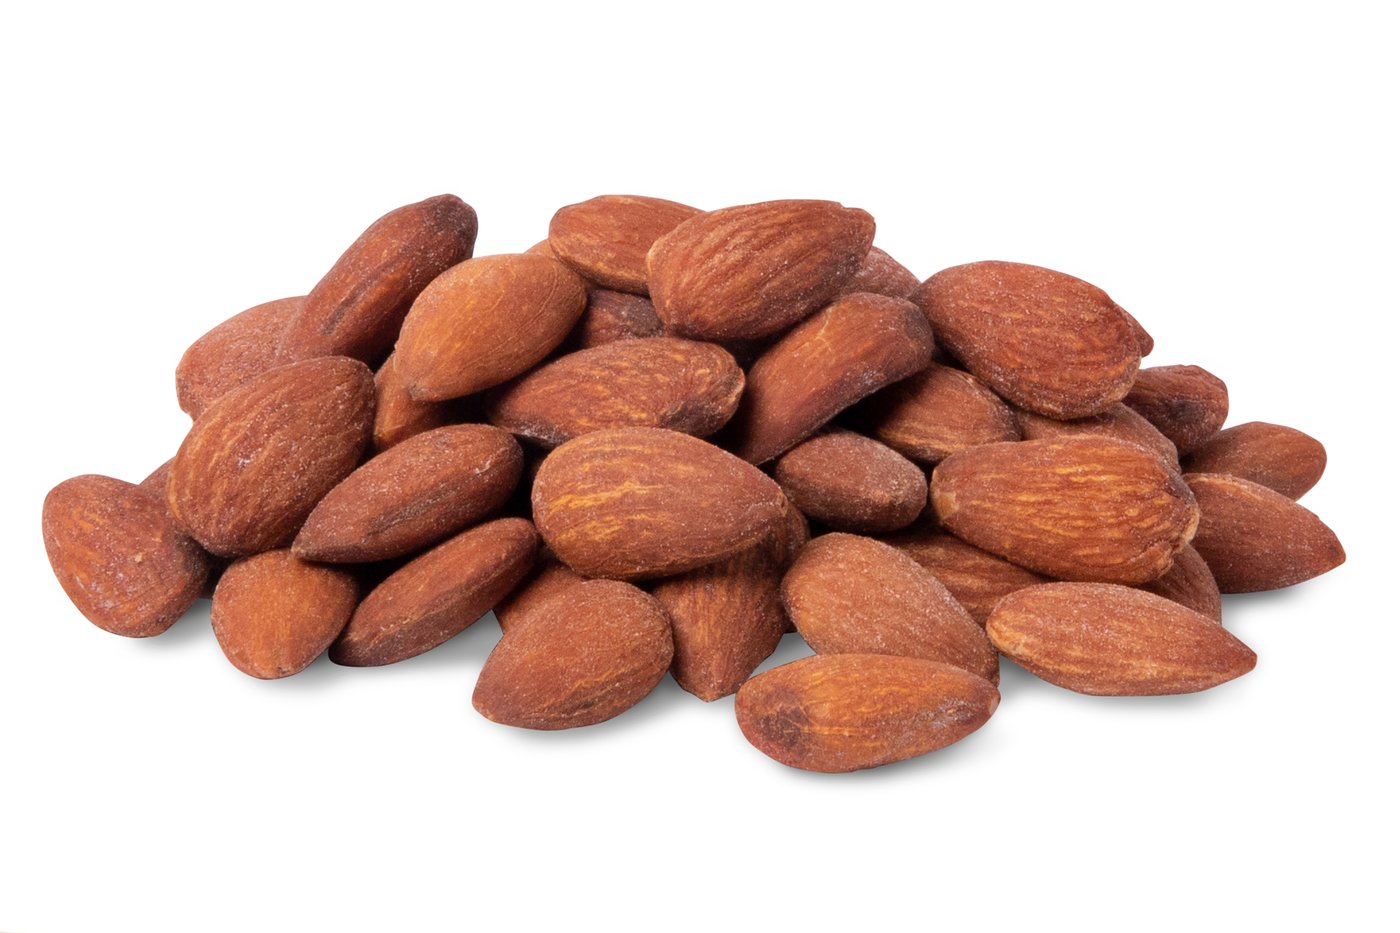 Roasted Almonds (Salted) photo